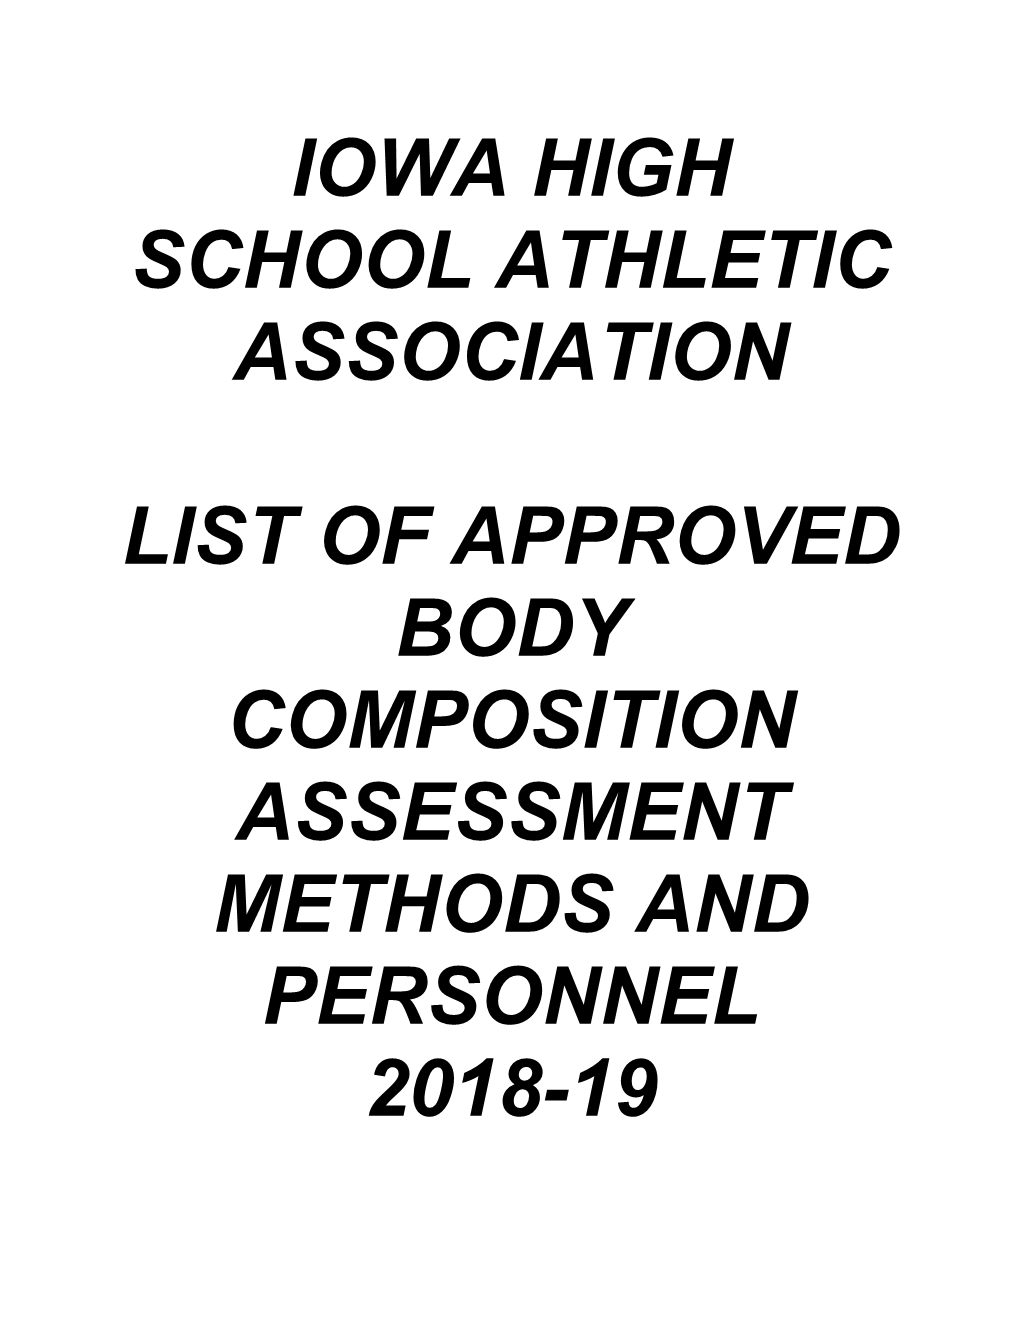 Iowa High School Athletic Association List of Approved Body Composition Assessment Methods, 2018-19